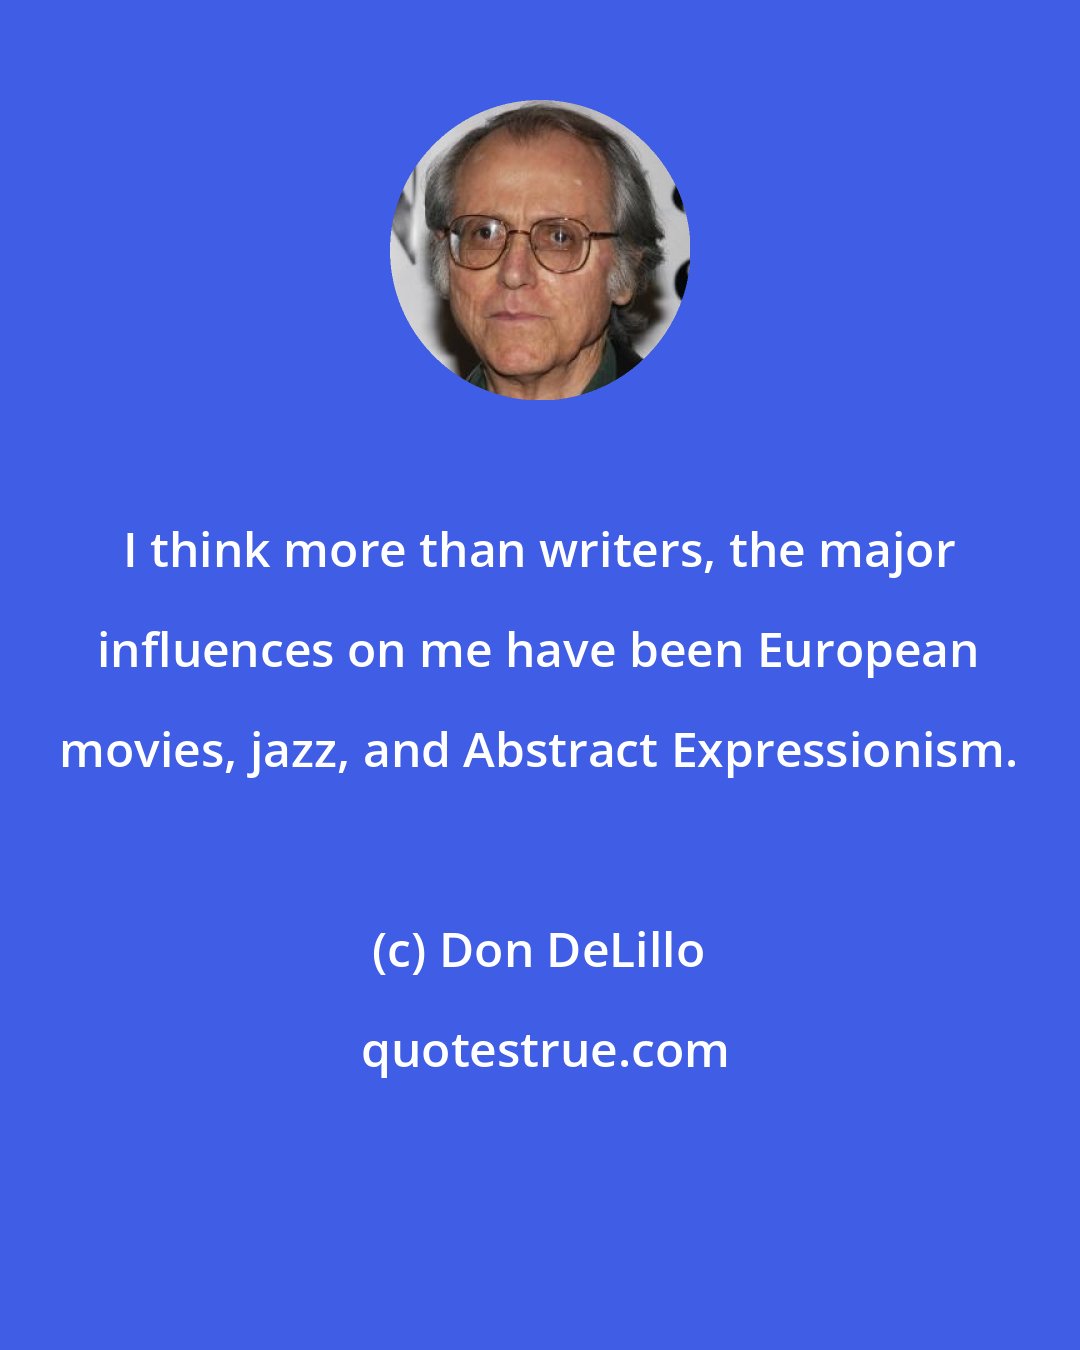 Don DeLillo: I think more than writers, the major influences on me have been European movies, jazz, and Abstract Expressionism.